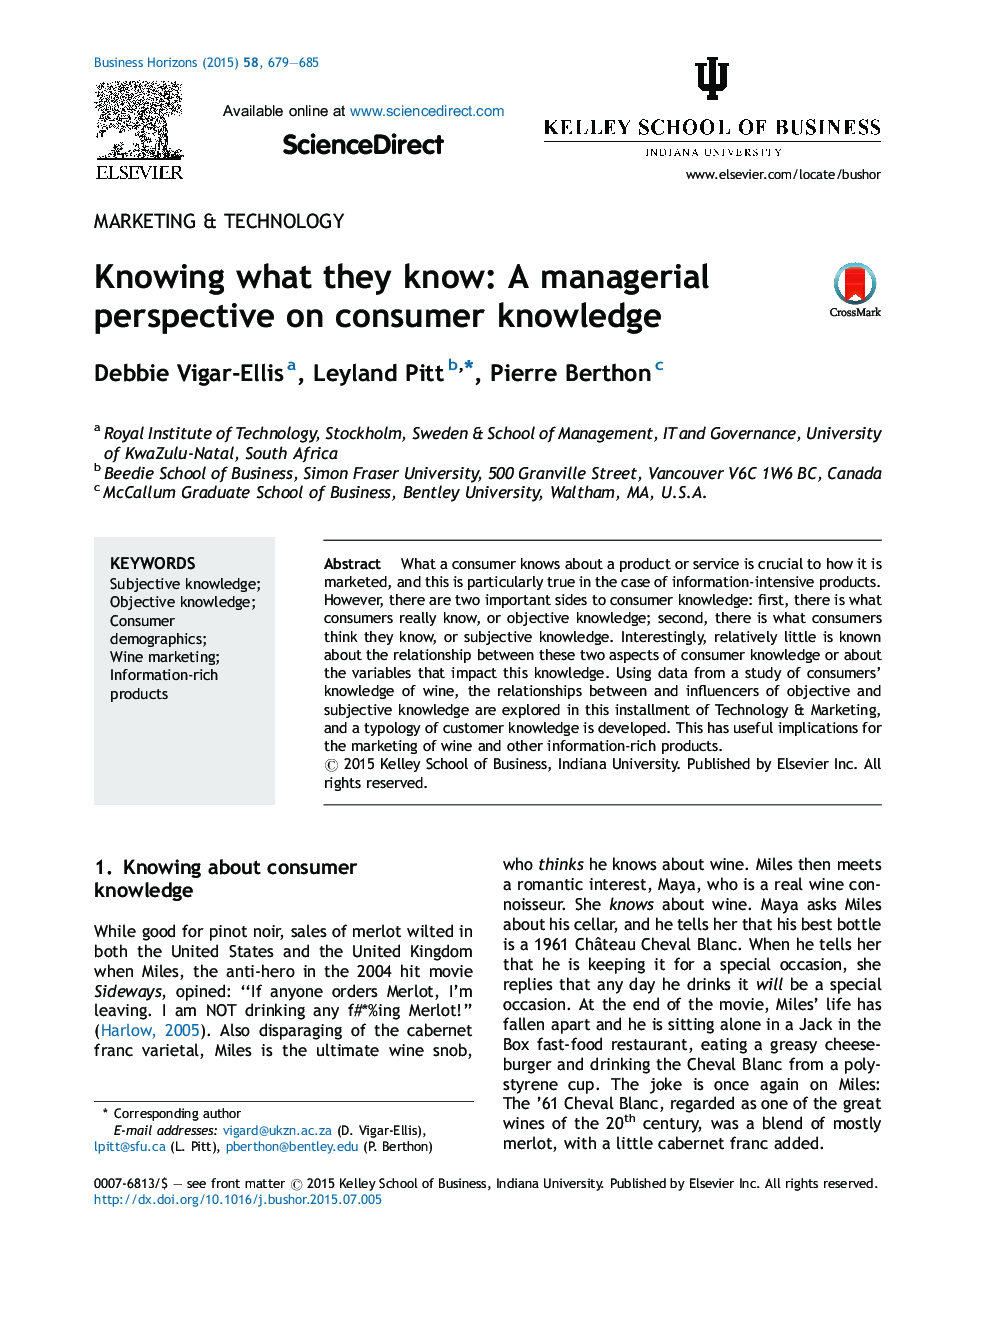 Knowing what they know: A managerial perspective on consumer knowledge